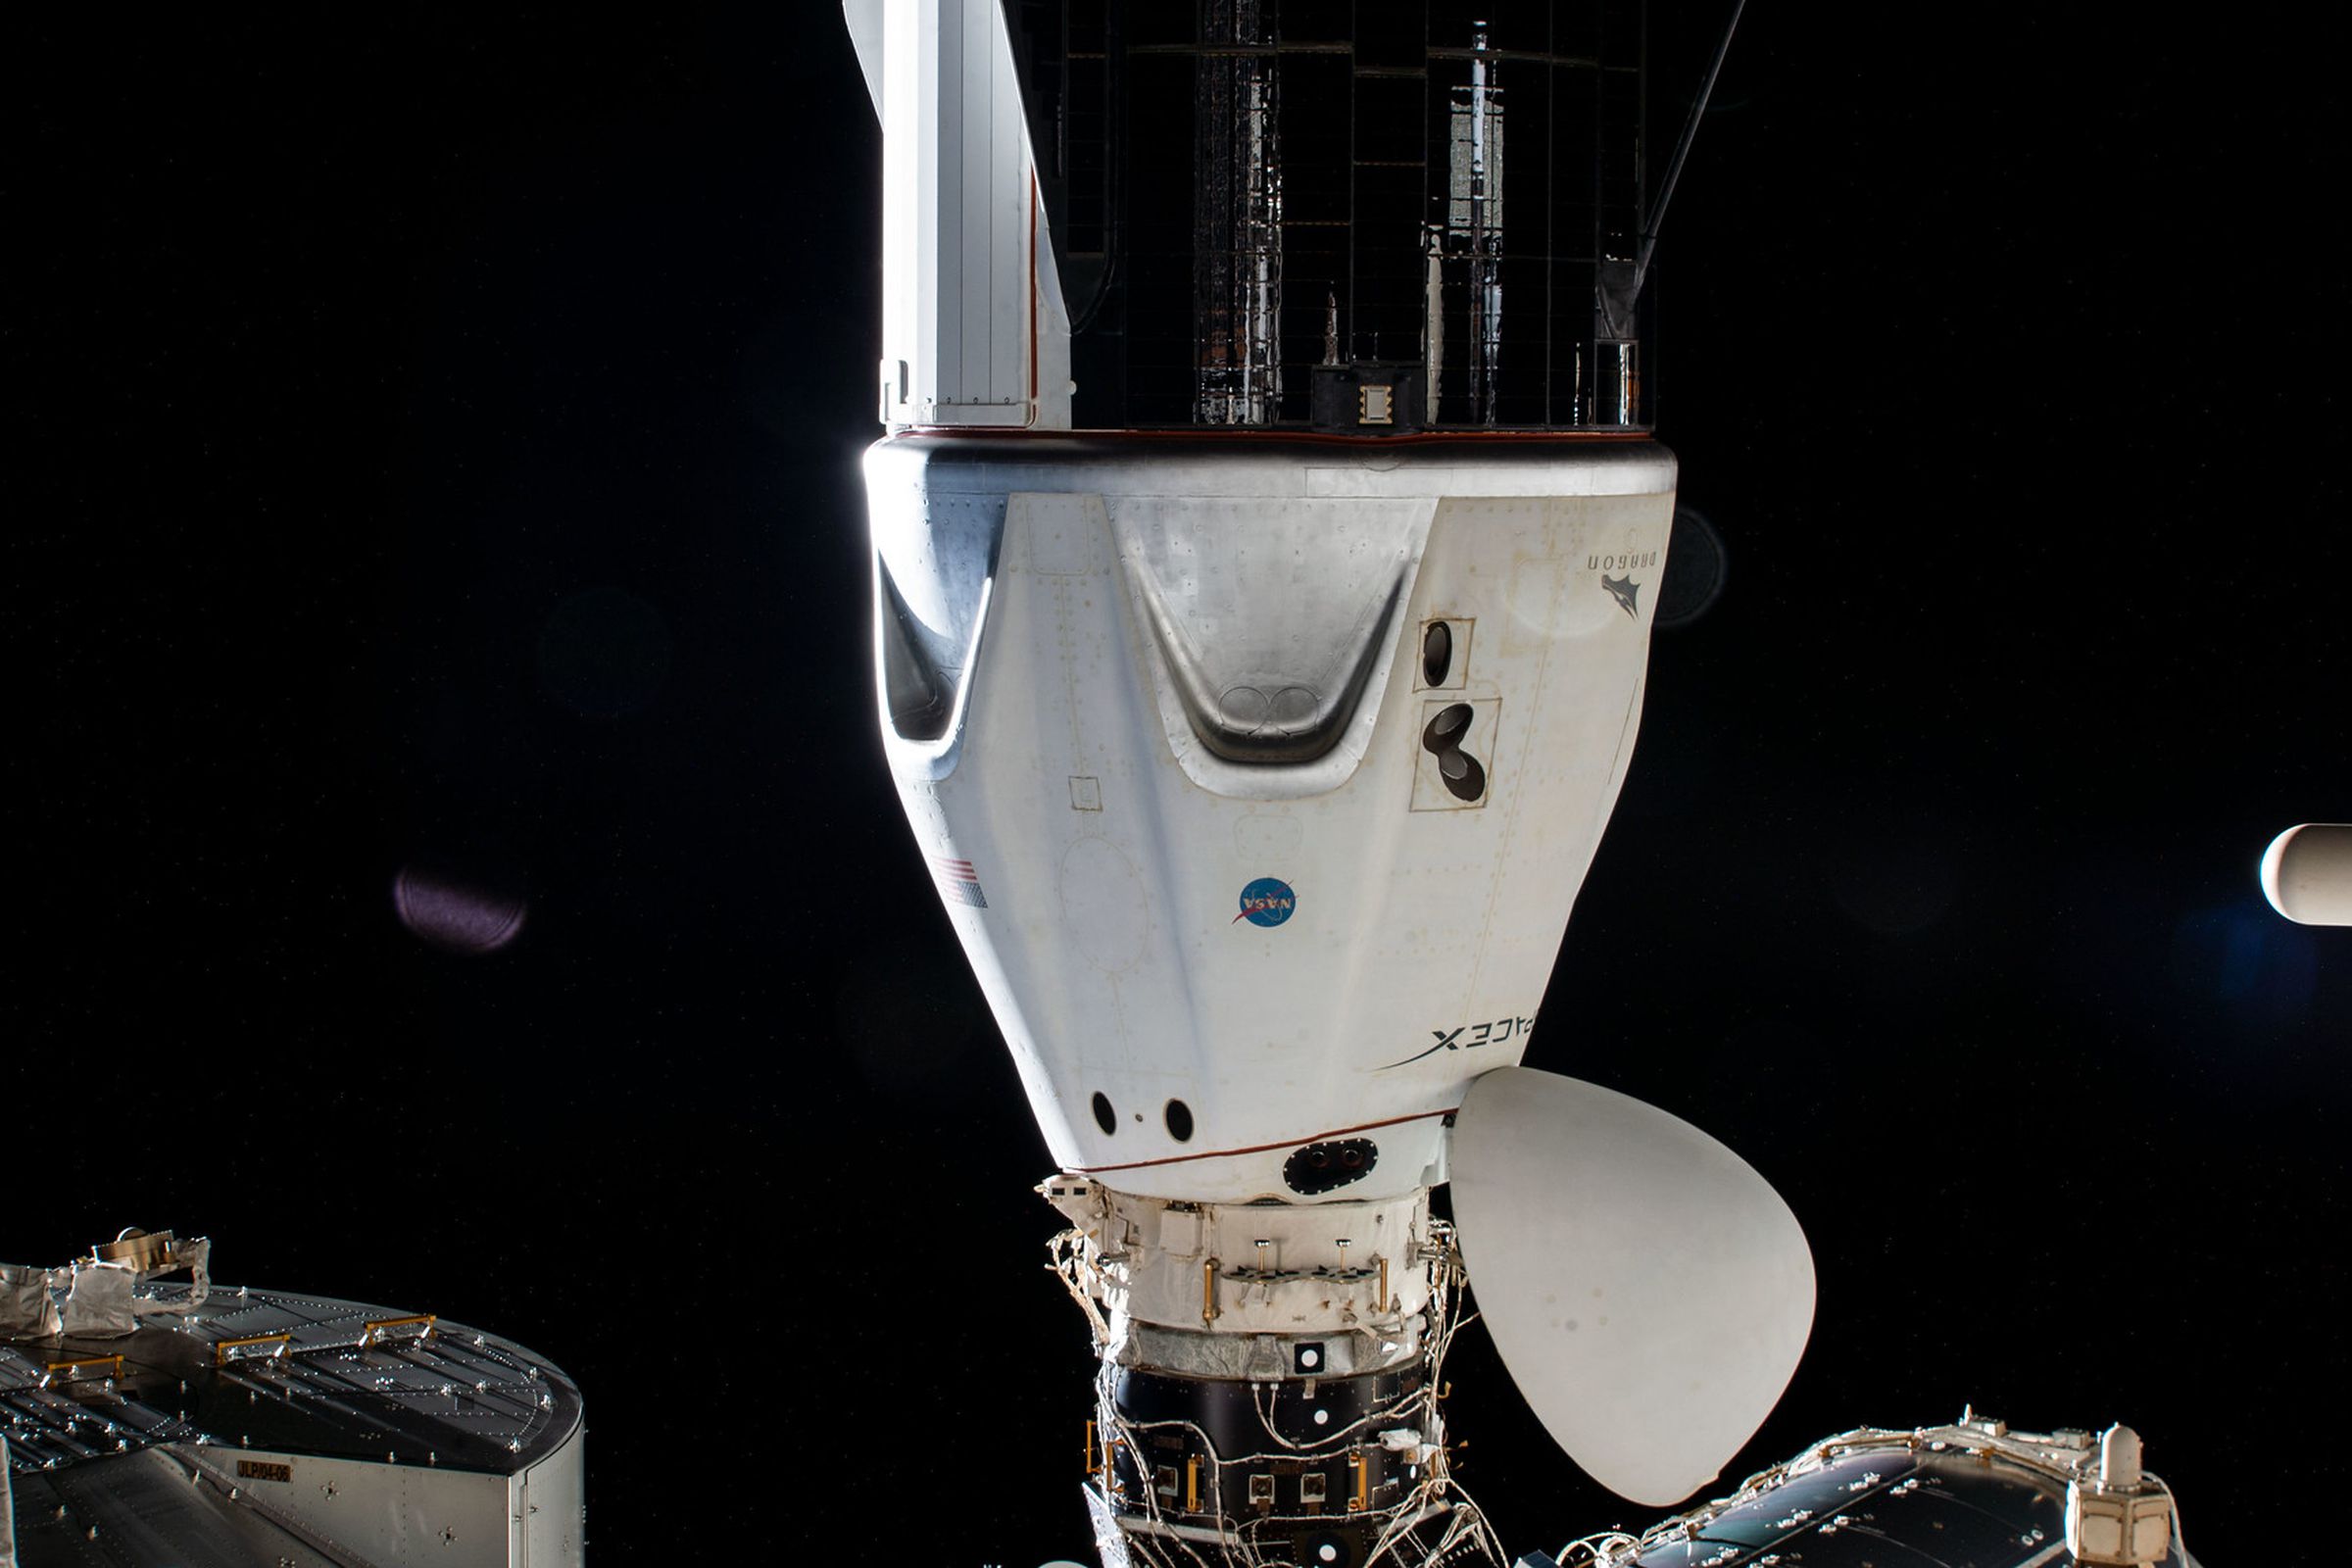 SpaceX’s Crew Dragon capsule is seen docked to the ISS in April, 2021 after a port relocation manuever with its crew of four Crew-1 astronauts on board.